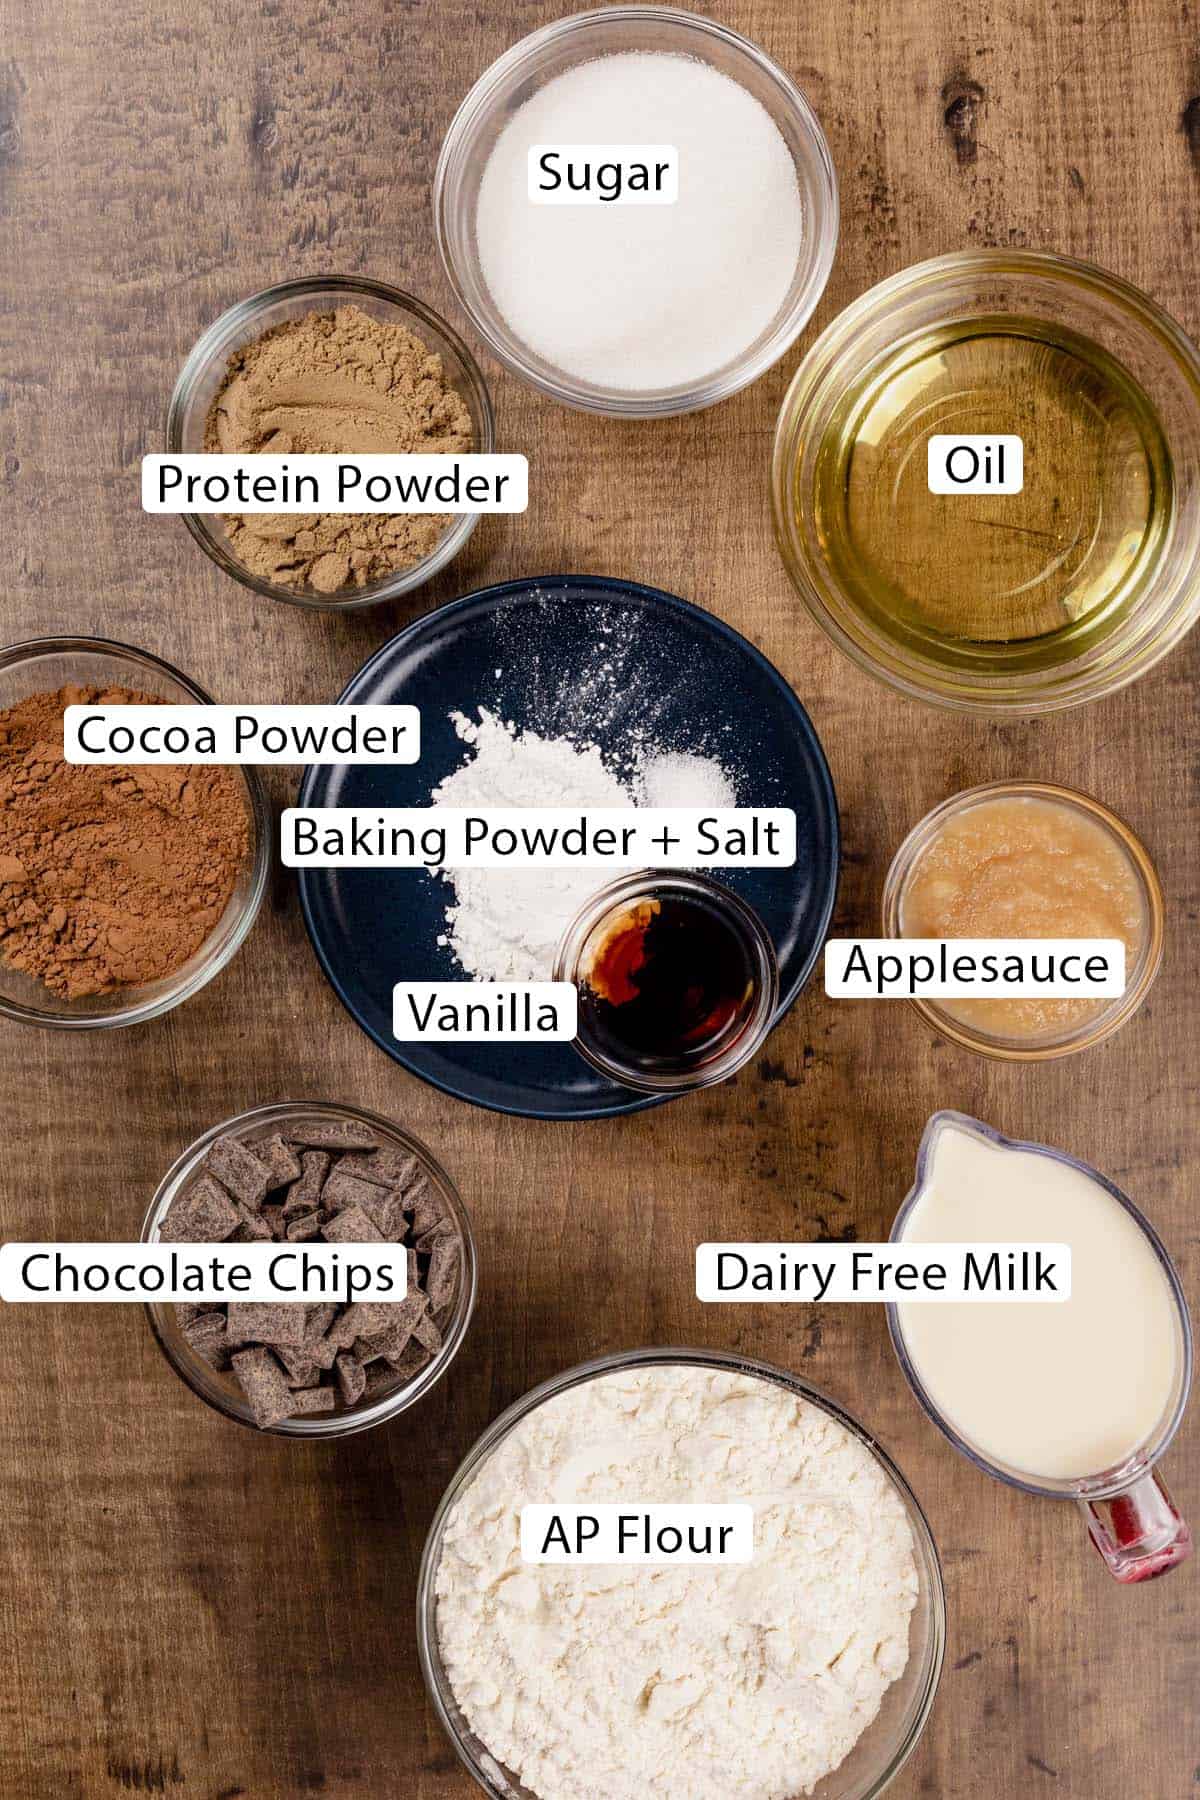 Ingredients for chocolate muffins in various glass bowls on a wood tabletop. Black and white labels have been added to name each ingredient.